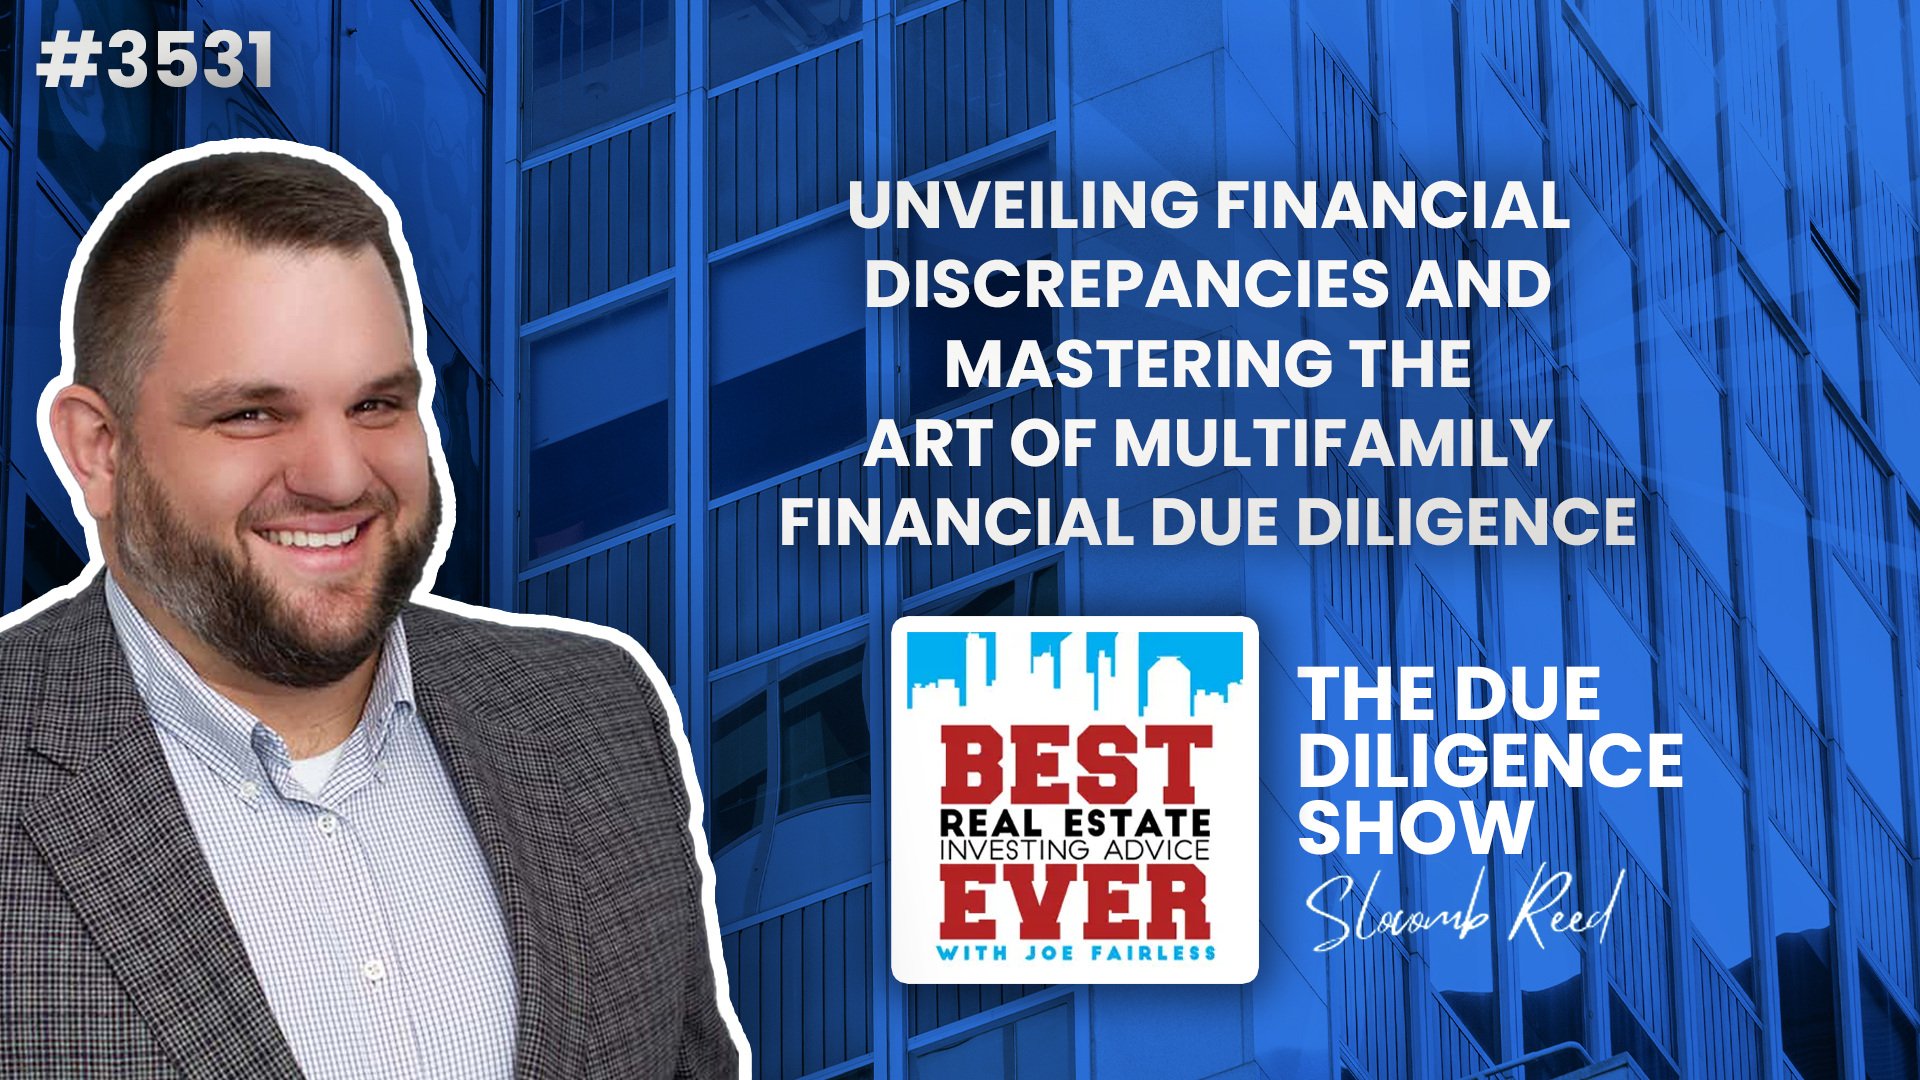 JF3531: Unveiling Financial Discrepancies and Mastering the Art of Multifamily Financial Due Diligence — The Due Diligence Show ft. Mark Teravella